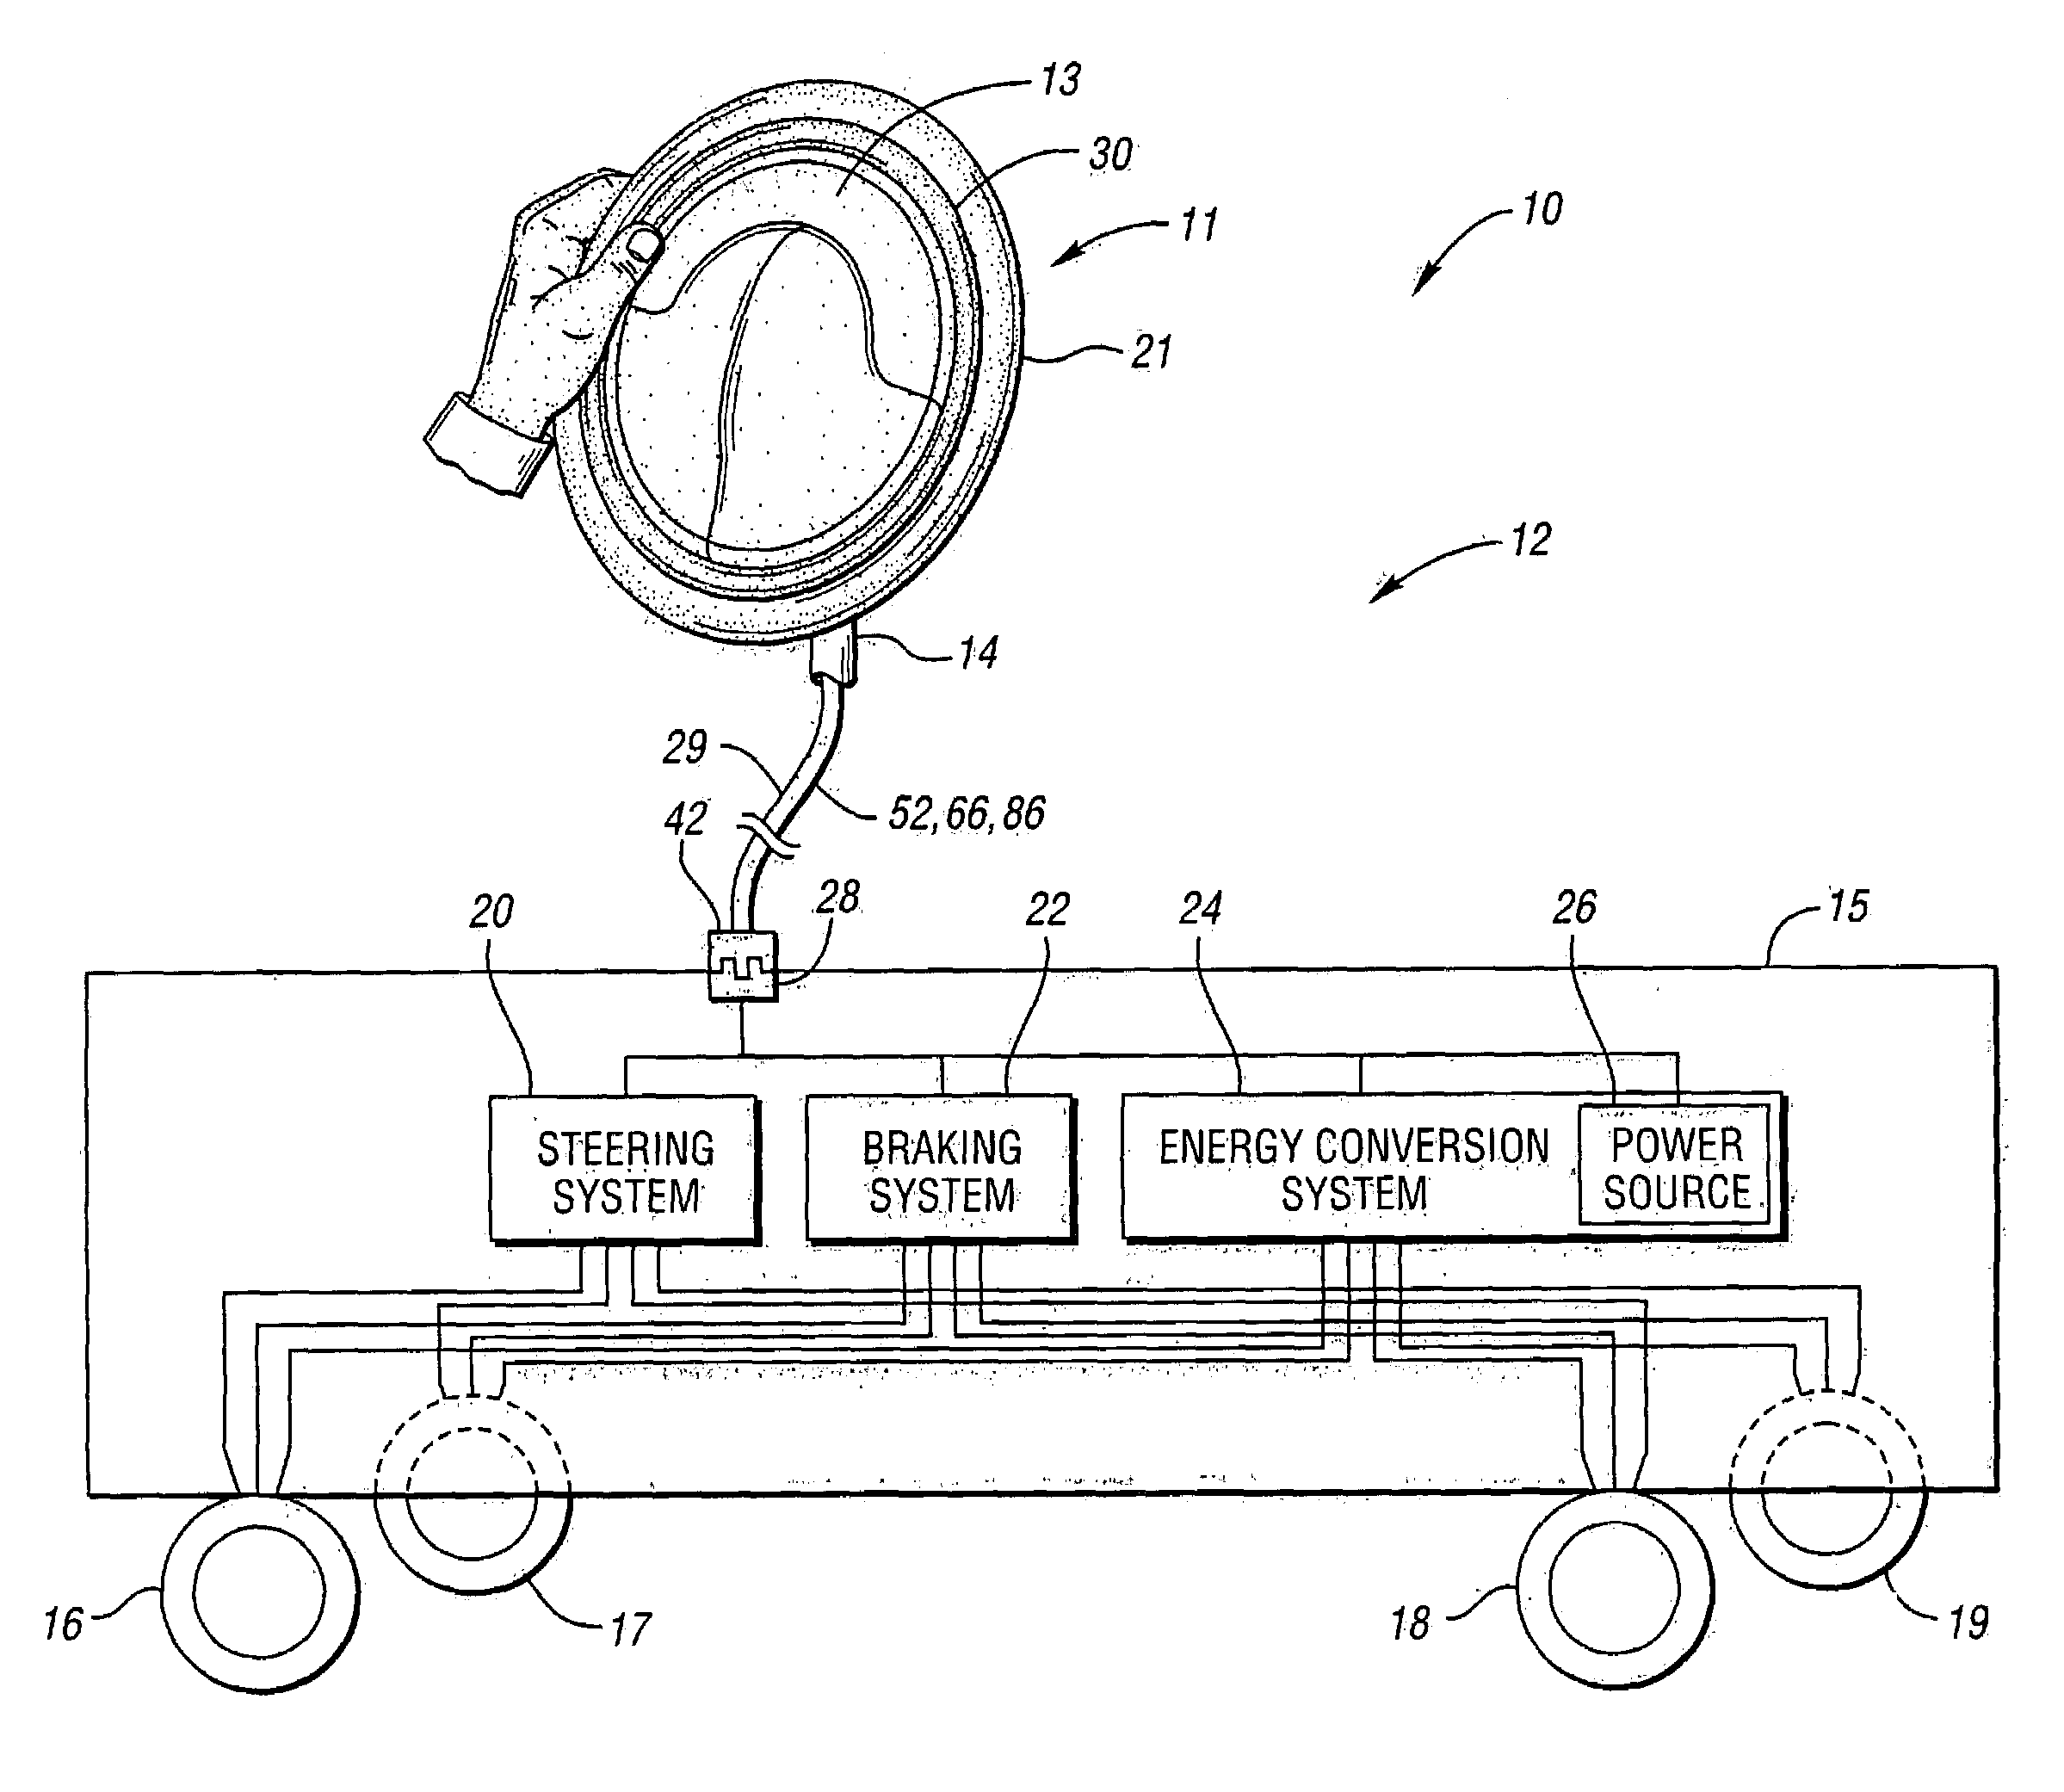 Driver control input device for drive-by-wire system